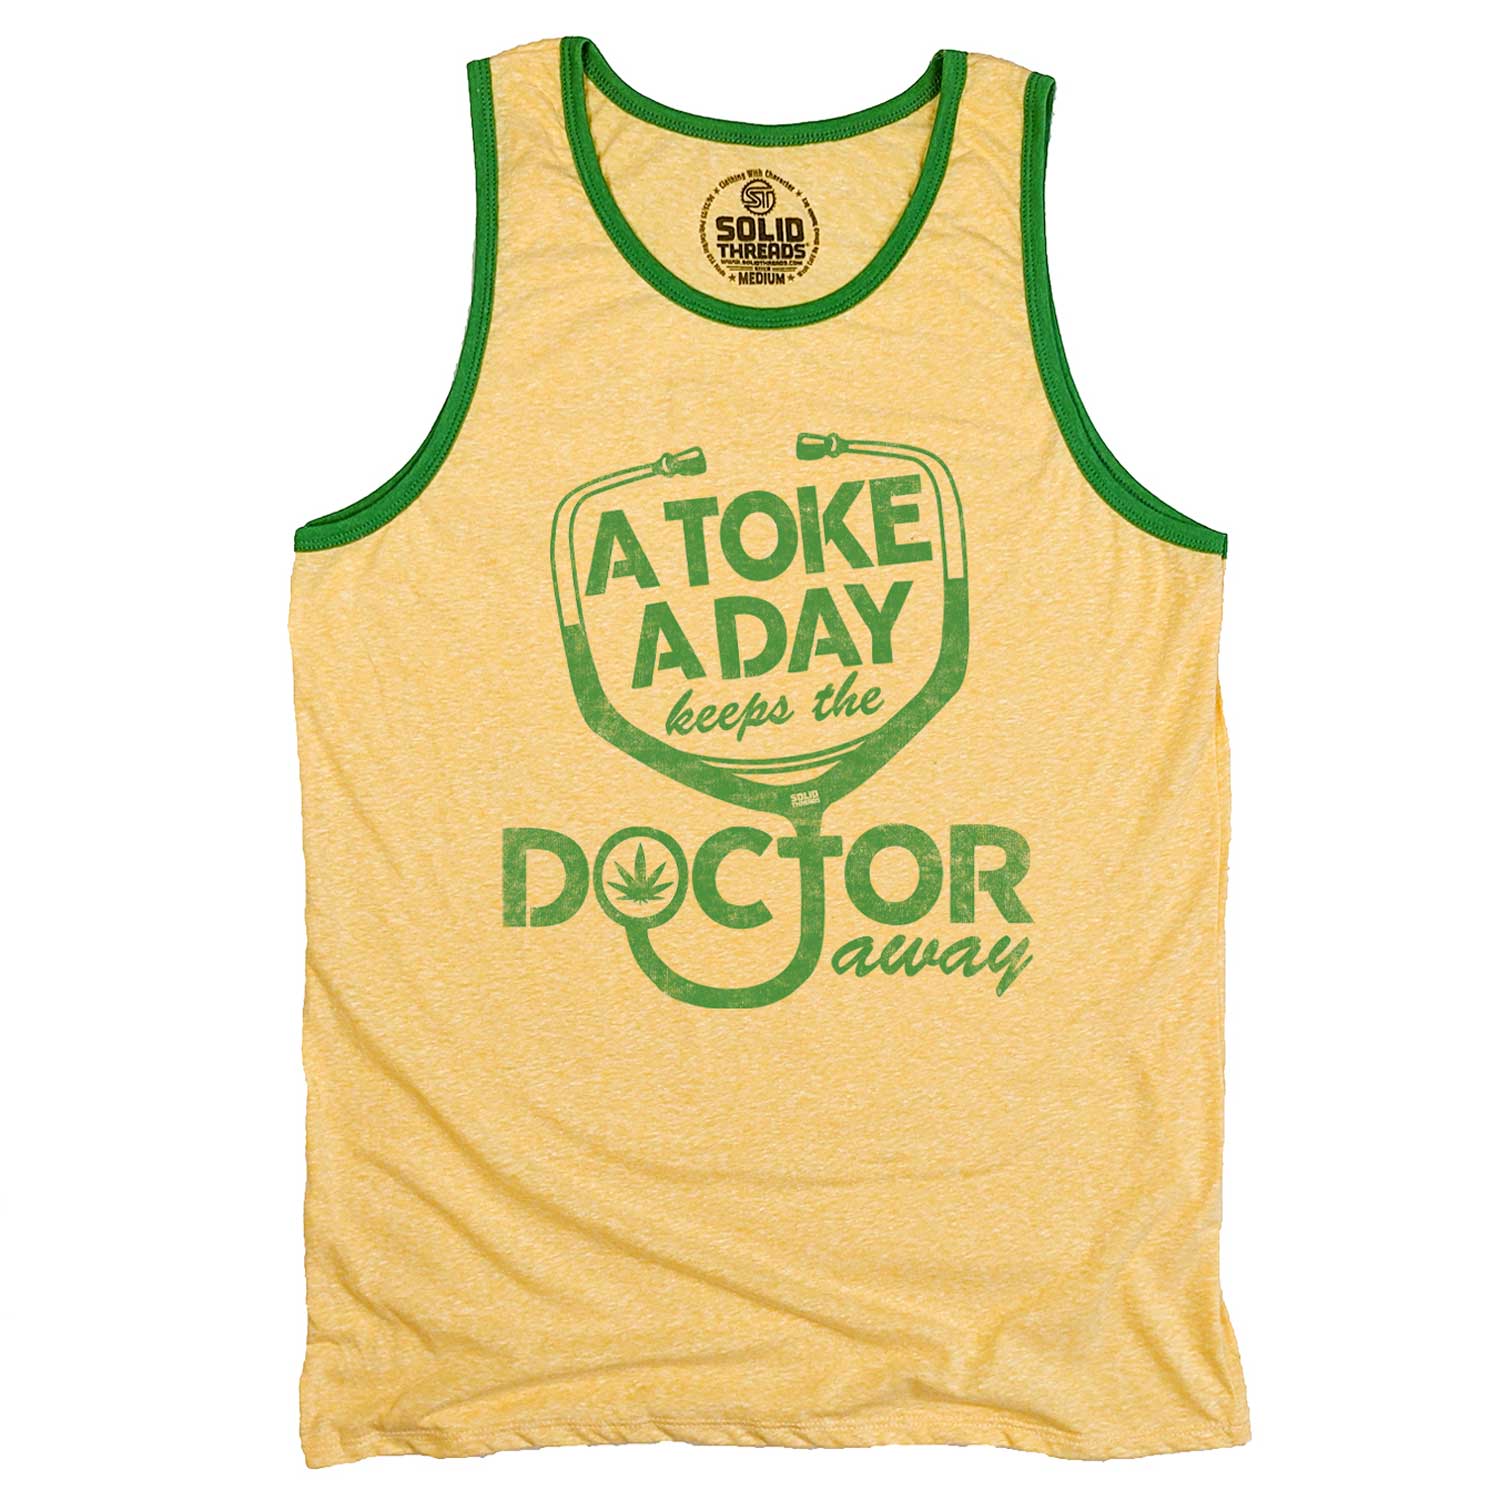 Men's A Toke A Day Keeps The Doctor Away Graphic Tank Top | Stoner Sleeveless Shirt | Solid Threads